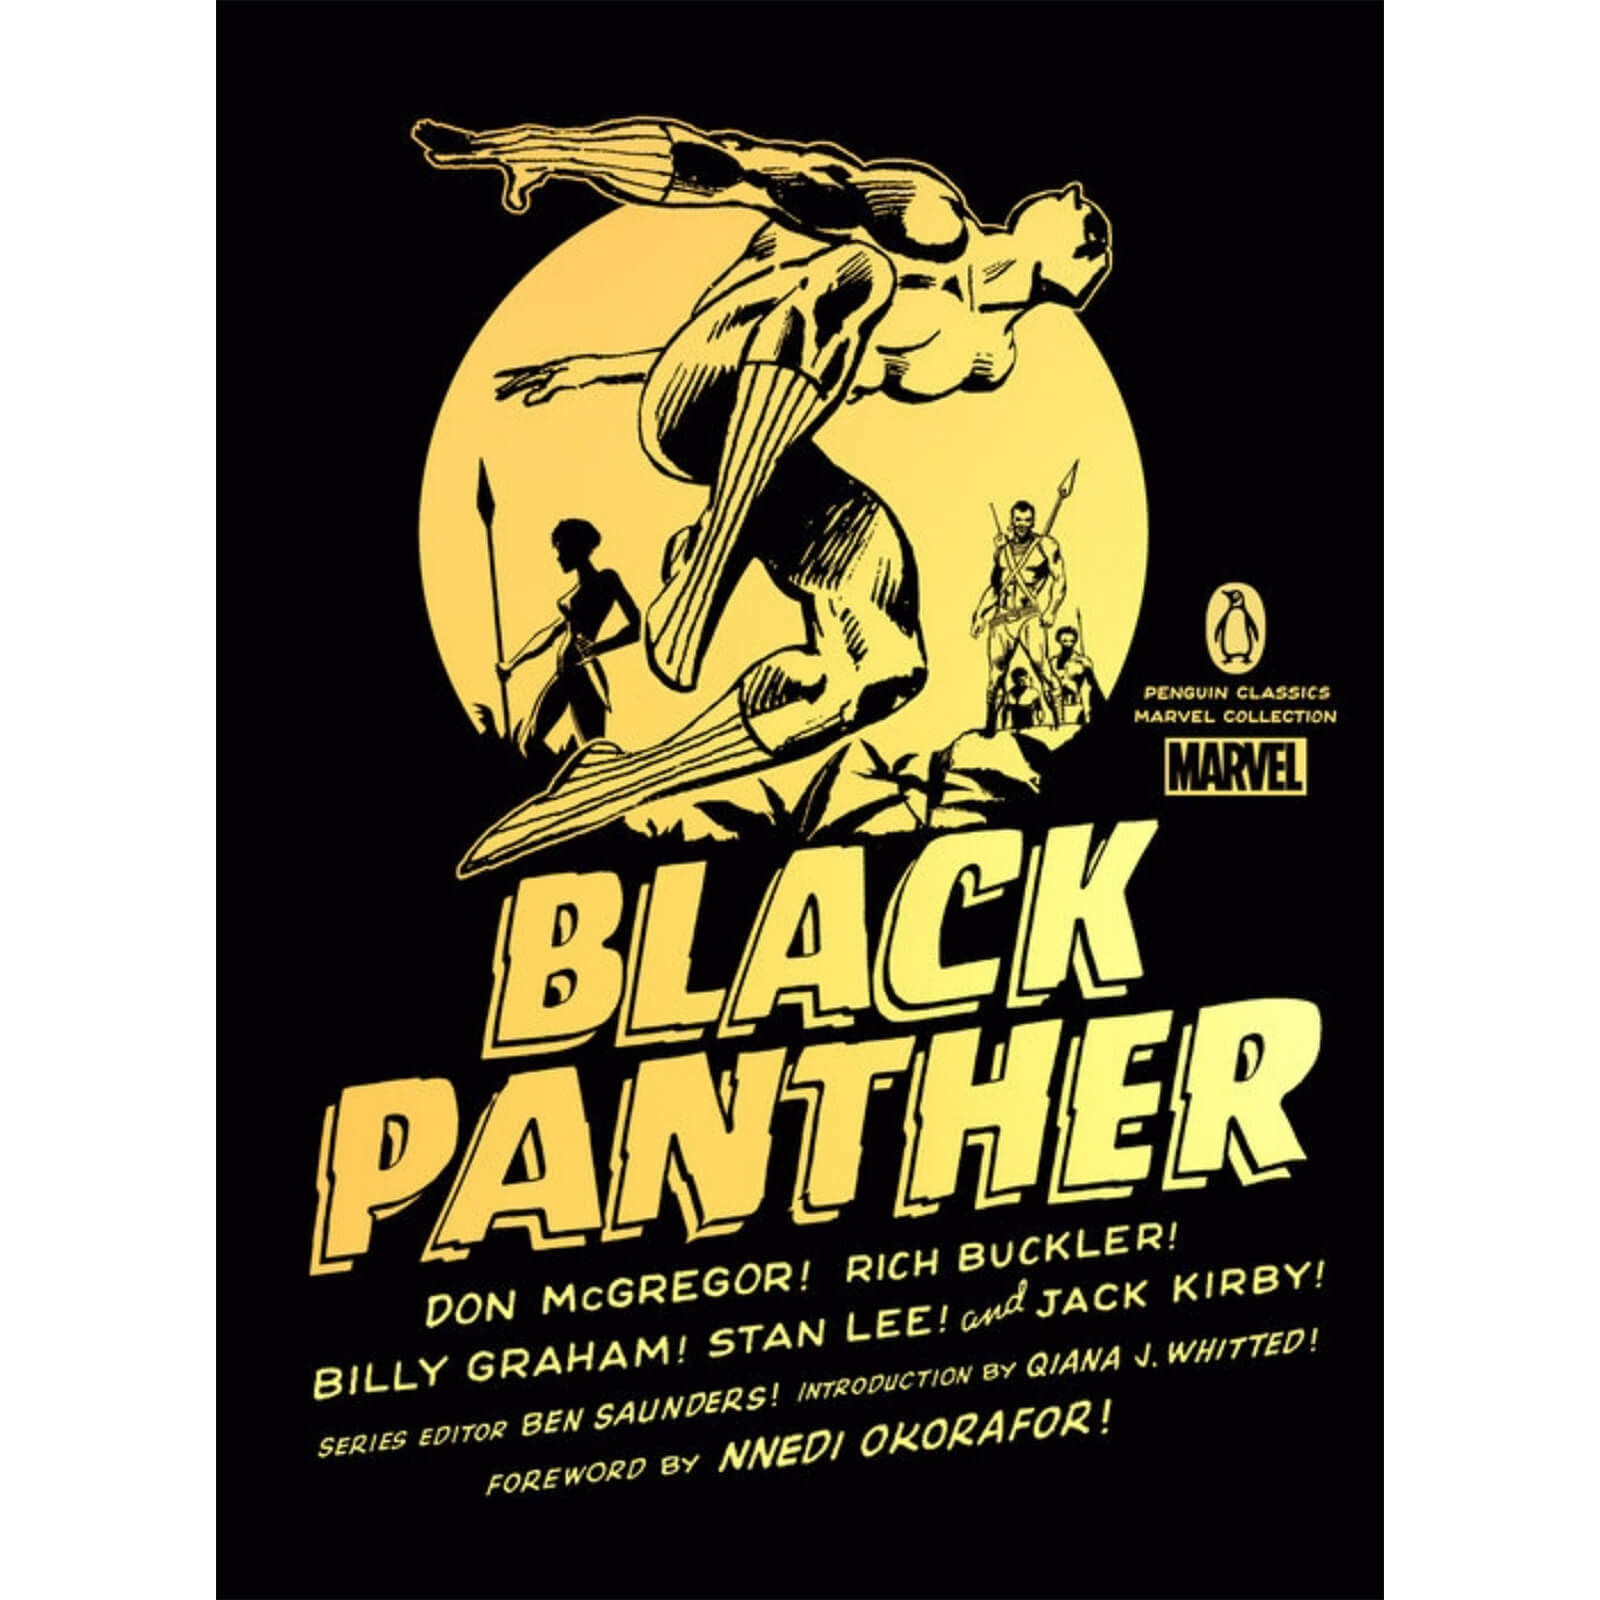 

Penguin Classics Marvel Collection - Black Panther Volume 1 (Hardcover)